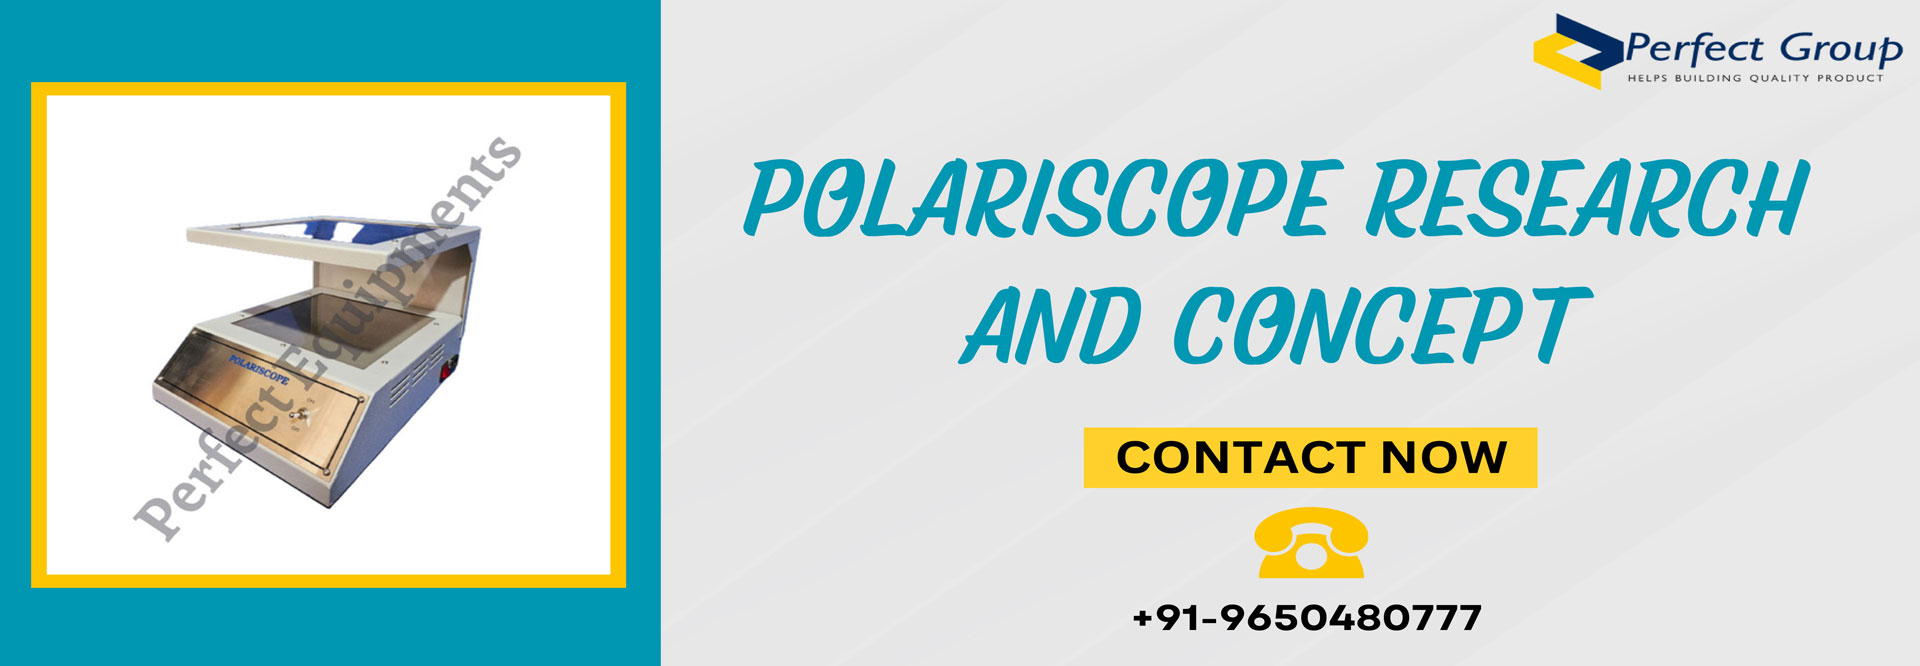 Polariscope Research And Concept